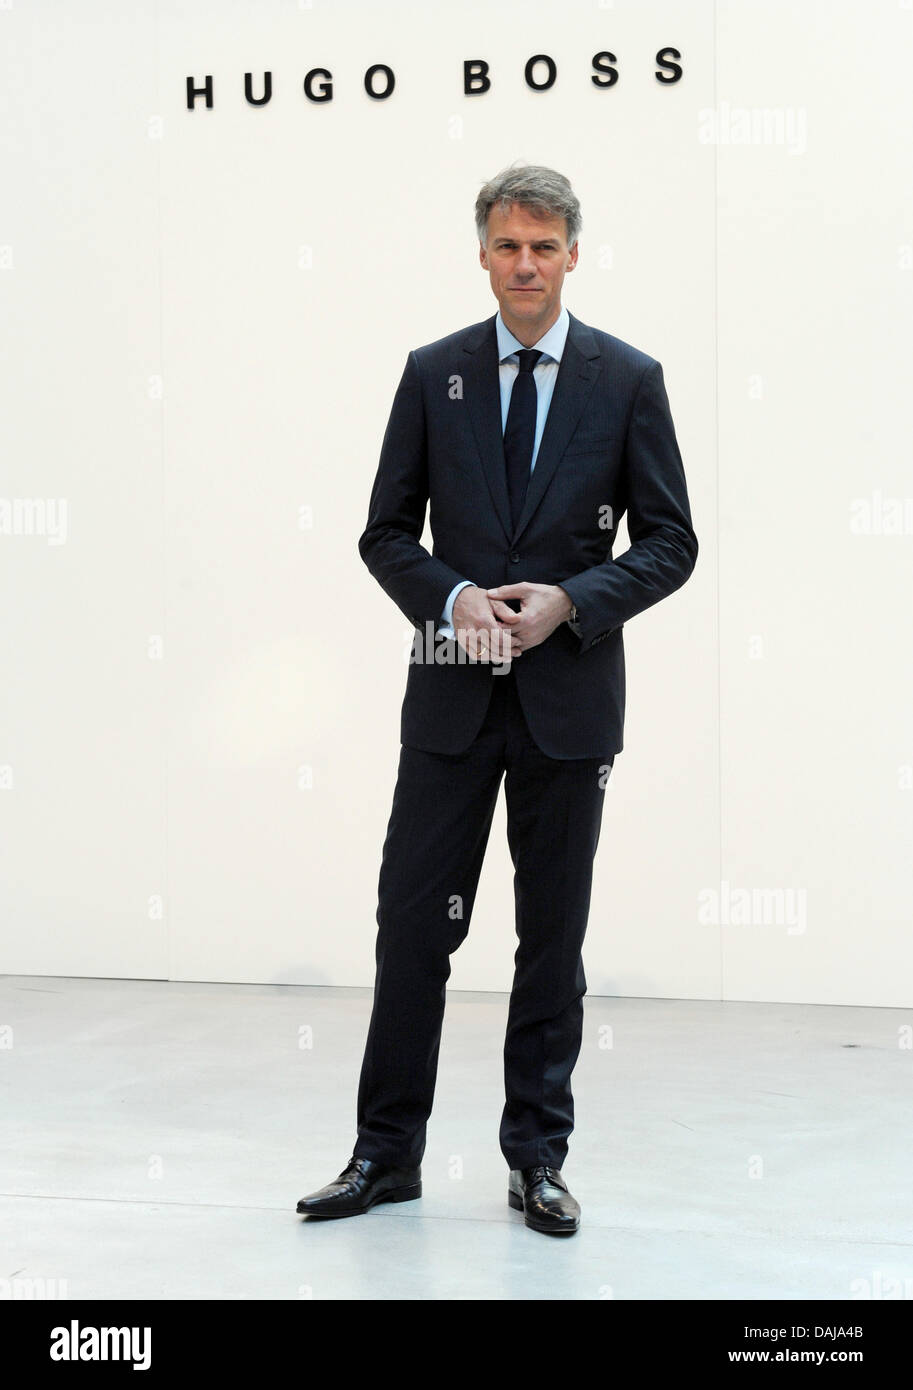 Hugo Boss CEO Claus-Dietrich Lahrs smiles before the fashion company's  balance press conference in Metzingen, Germany, 29 March 2011. Hugo Boss  reports a plus of eleven per cent in turnover to 1.72